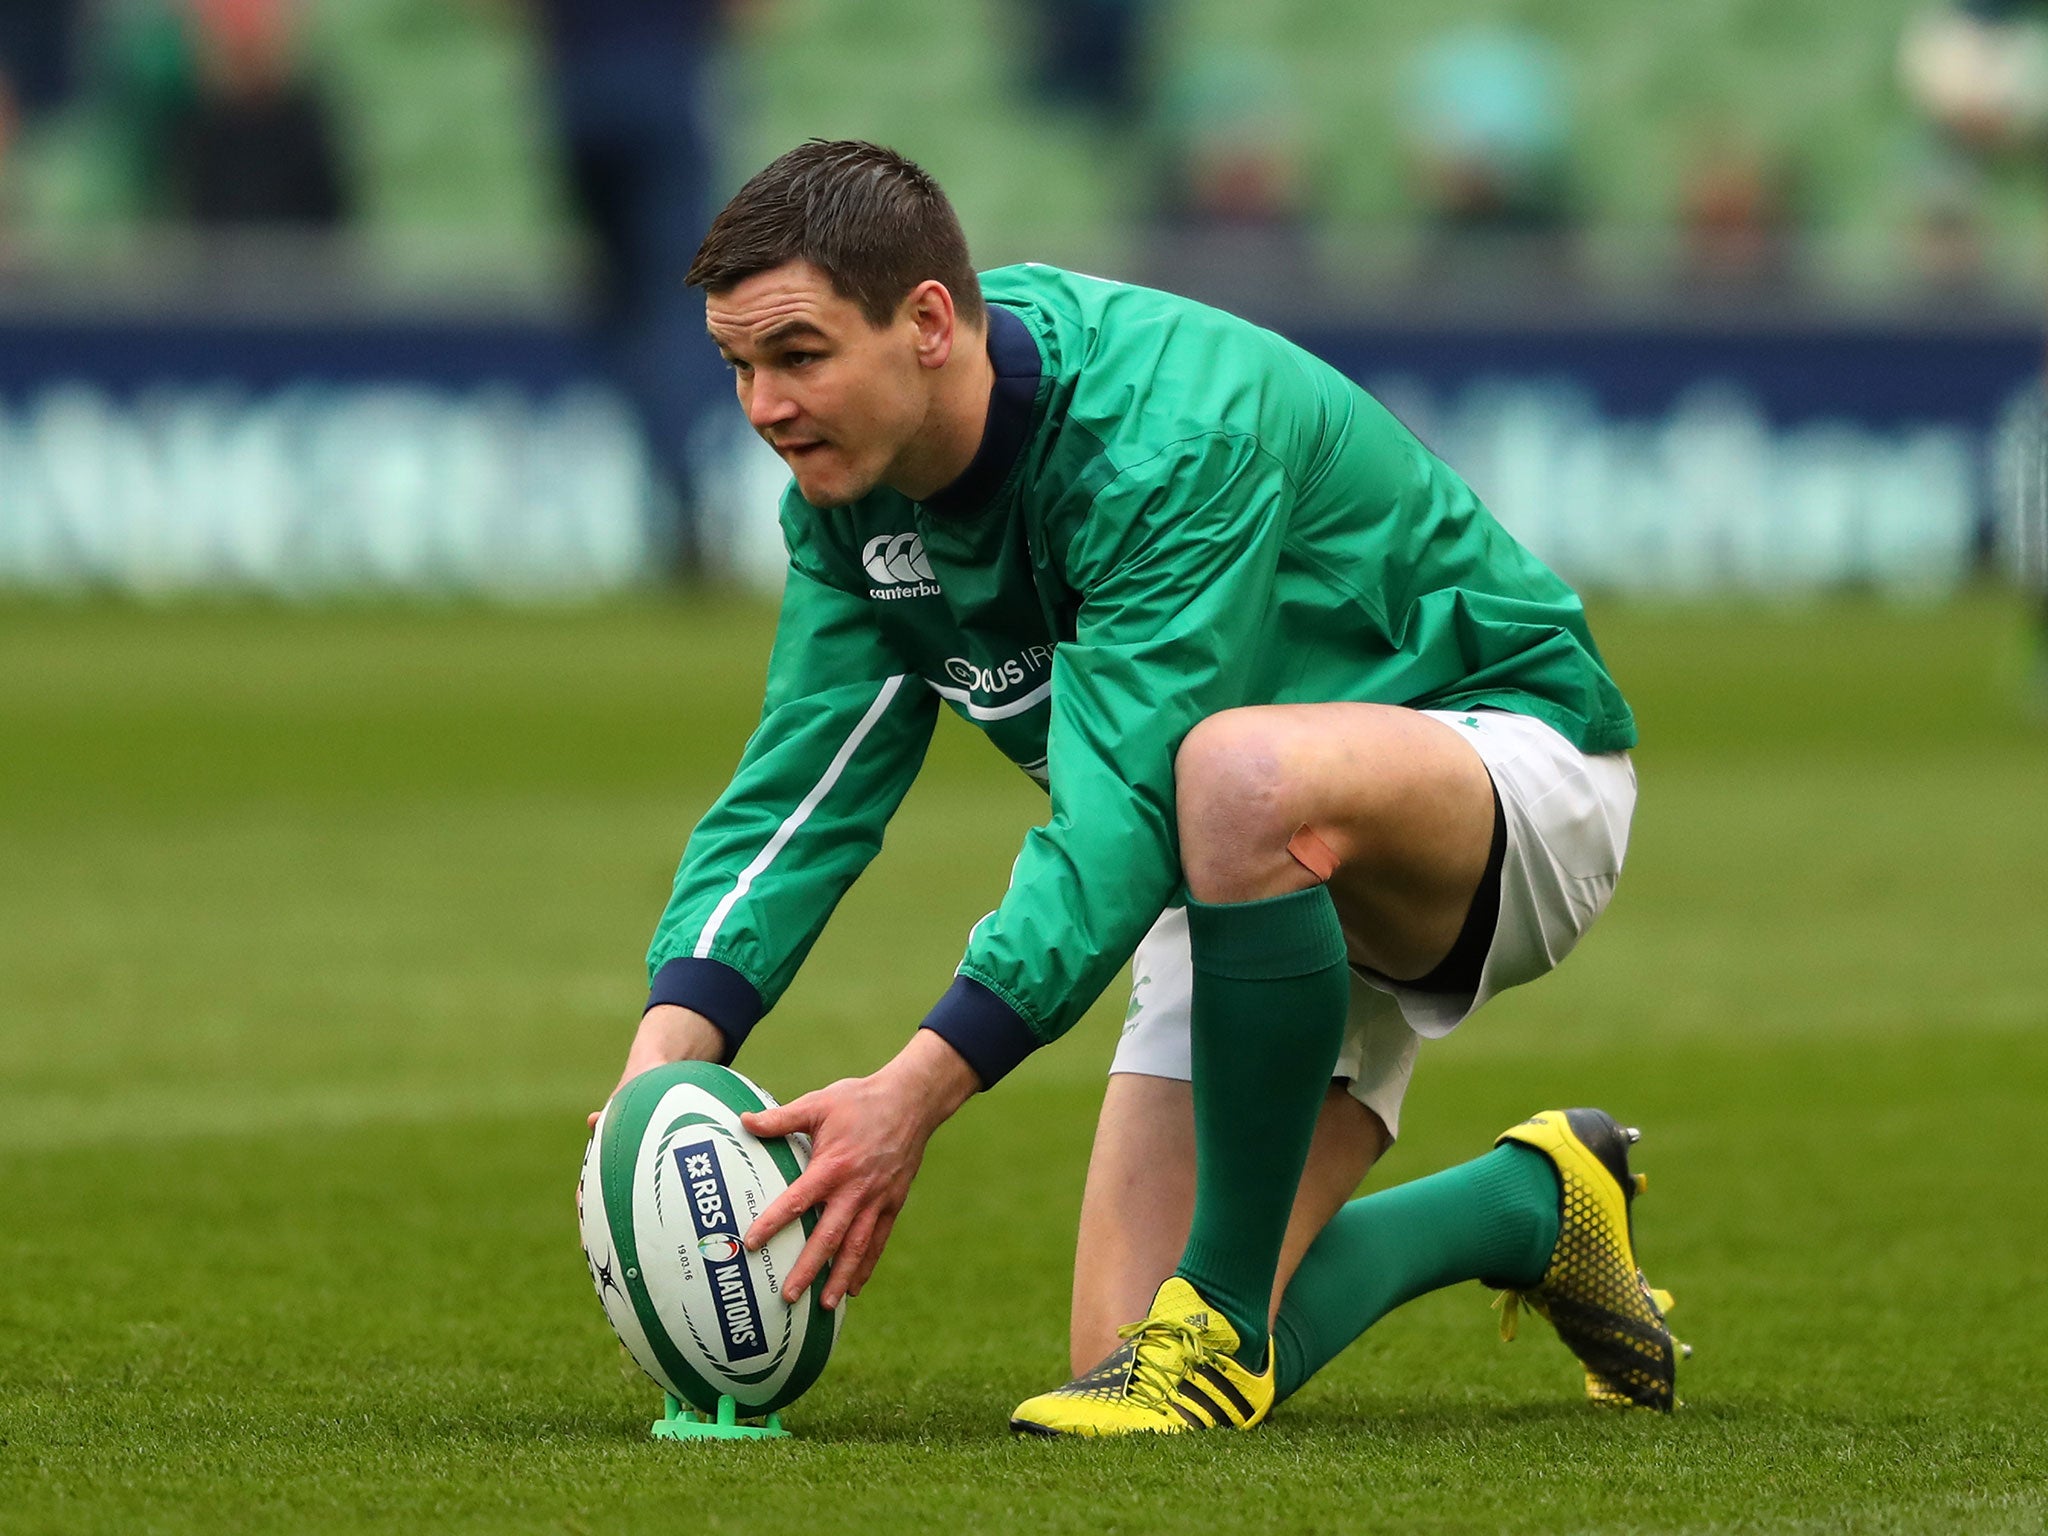 Sexton has not played since Leinster's 24-24 draw at Castres on January 20